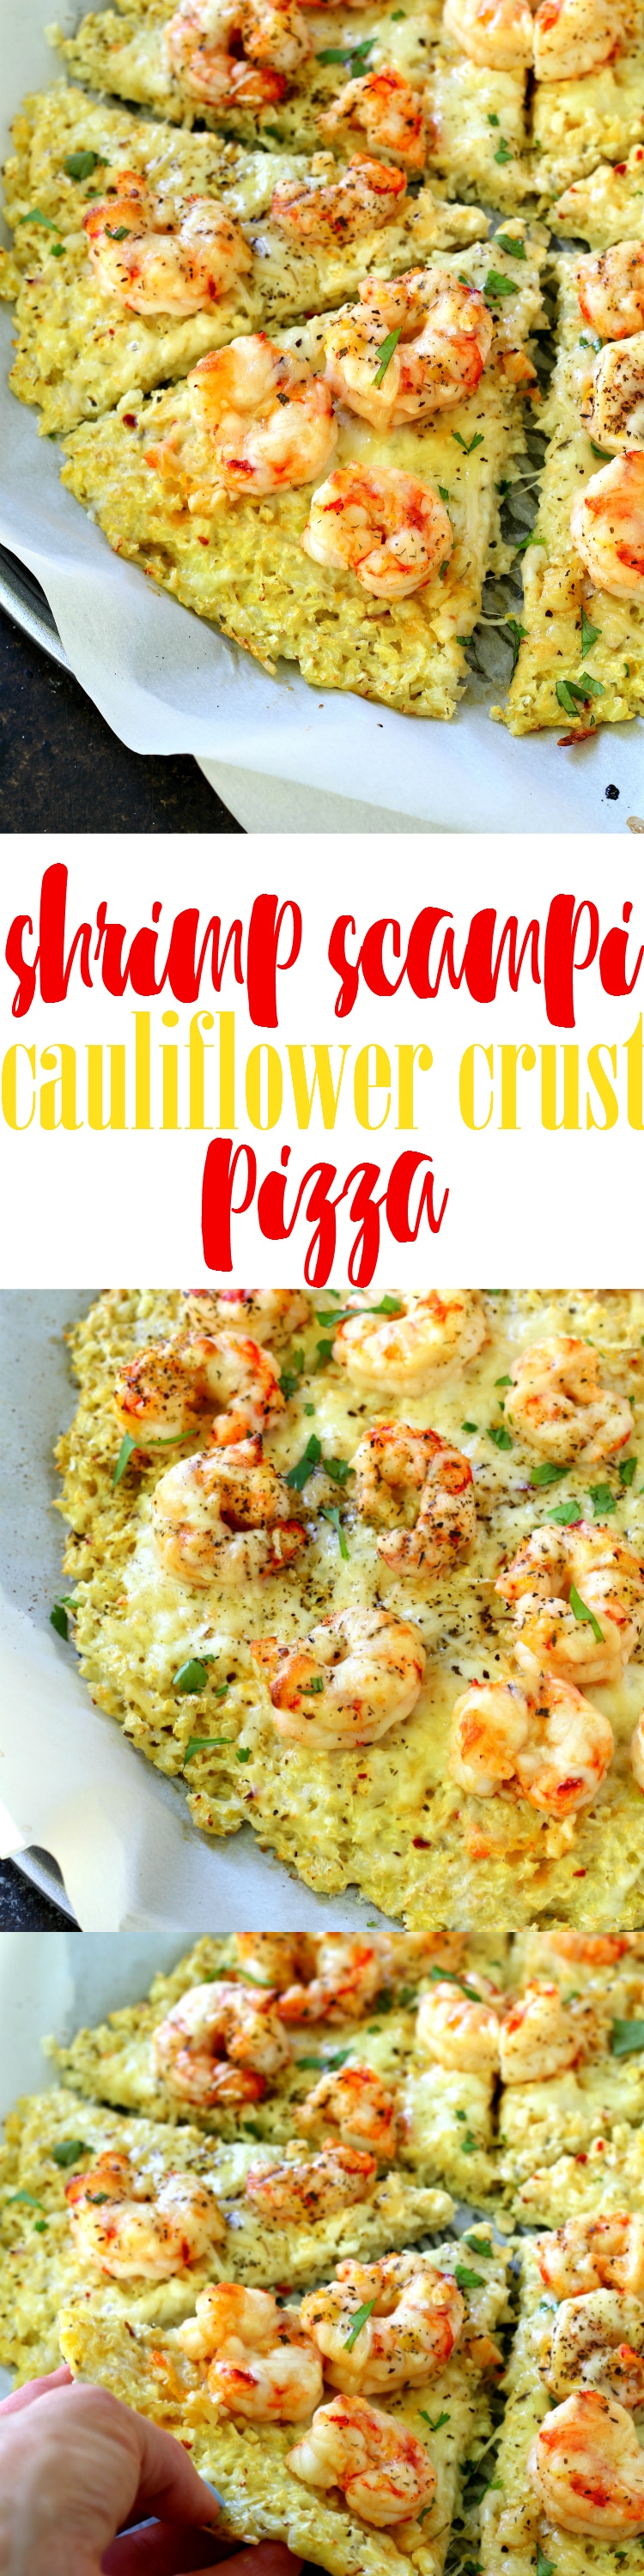 Shrimp Scampi Cauliflower Crust Pizza- the famous "Shrimp Scampi" ingredients in pizza form and made low carb with a cauliflower crust. Healthy, fresh and full of flavor!